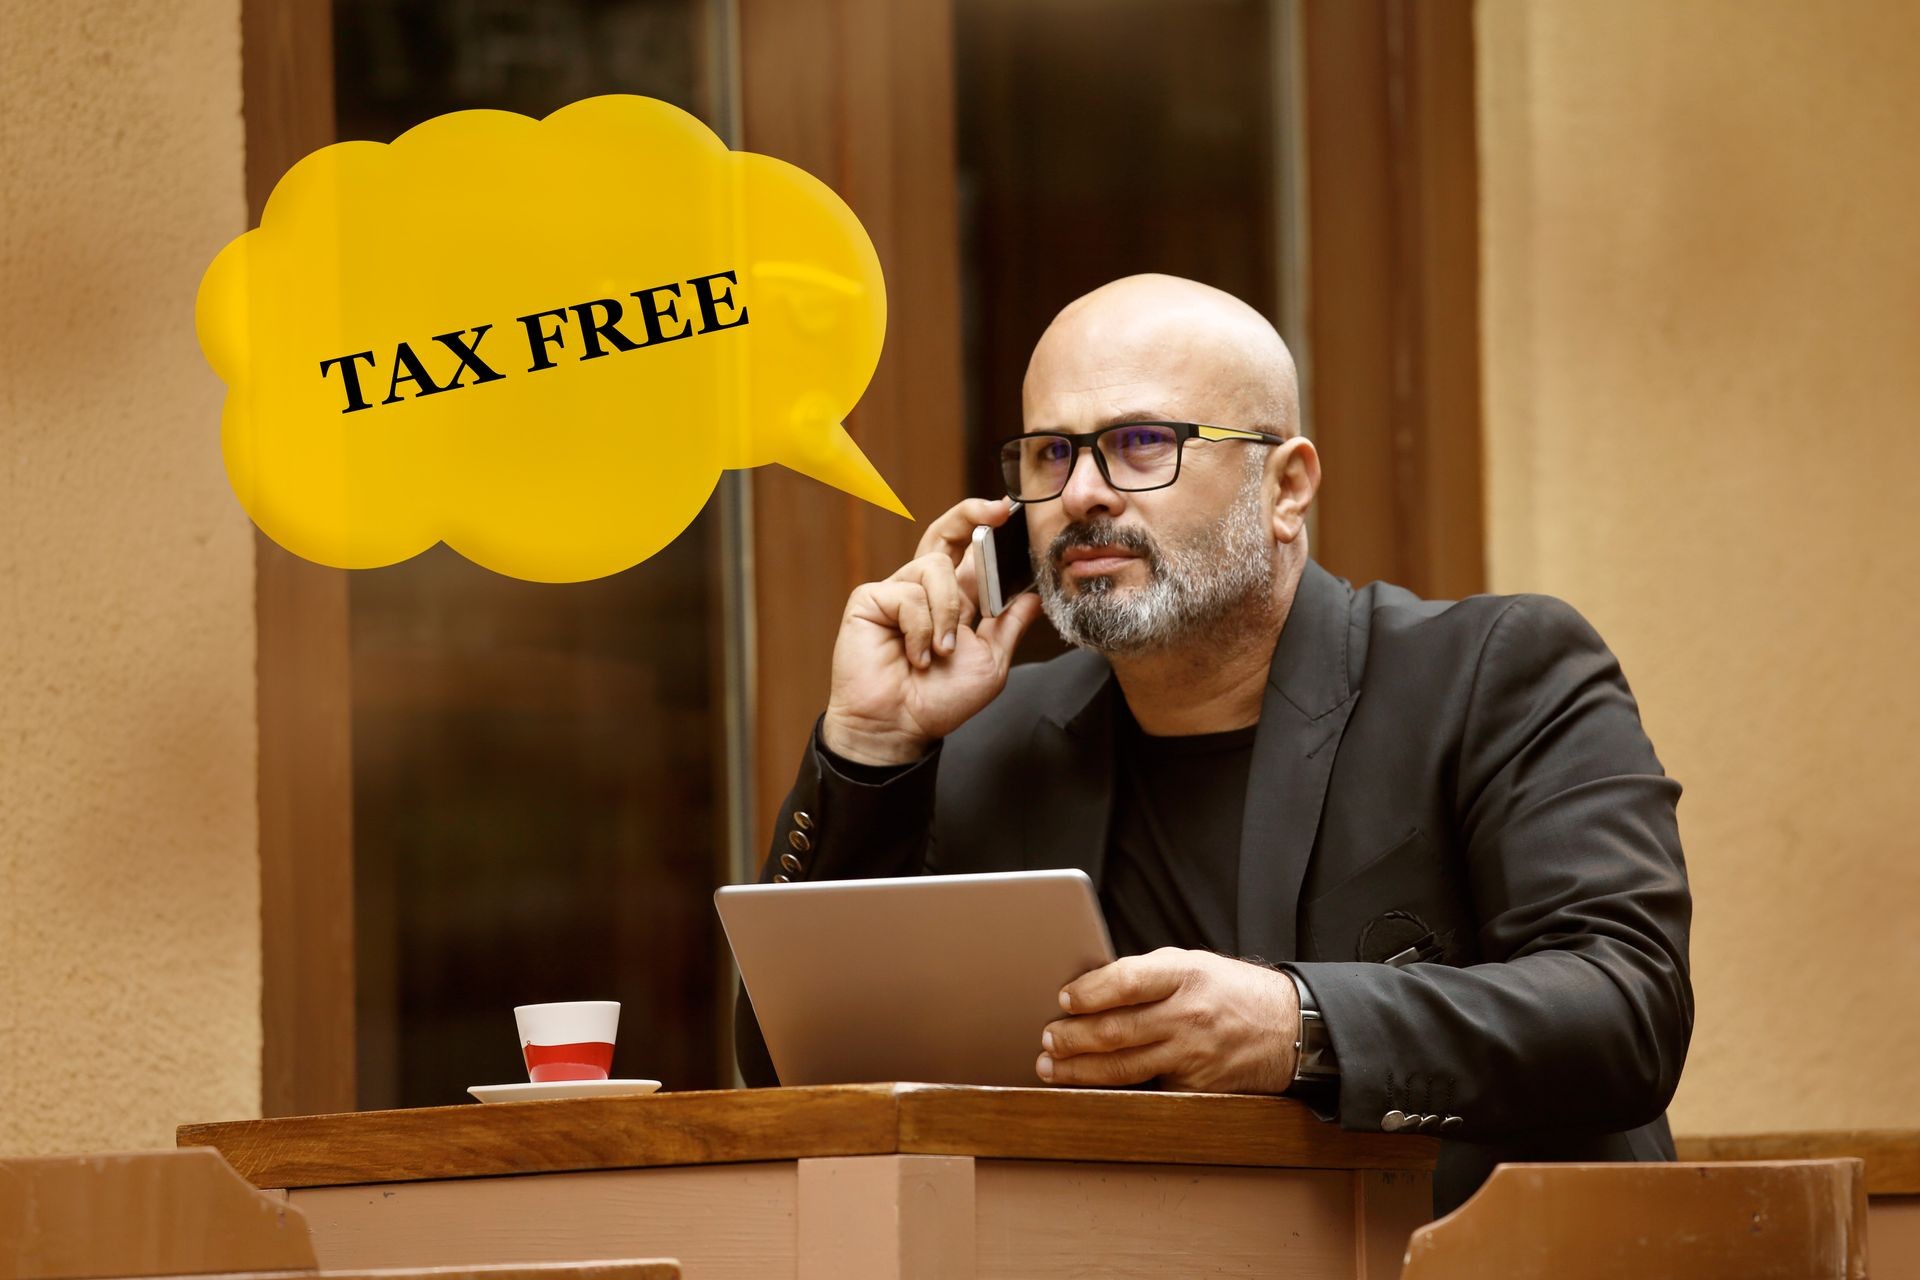 Tax Free, Business Concept